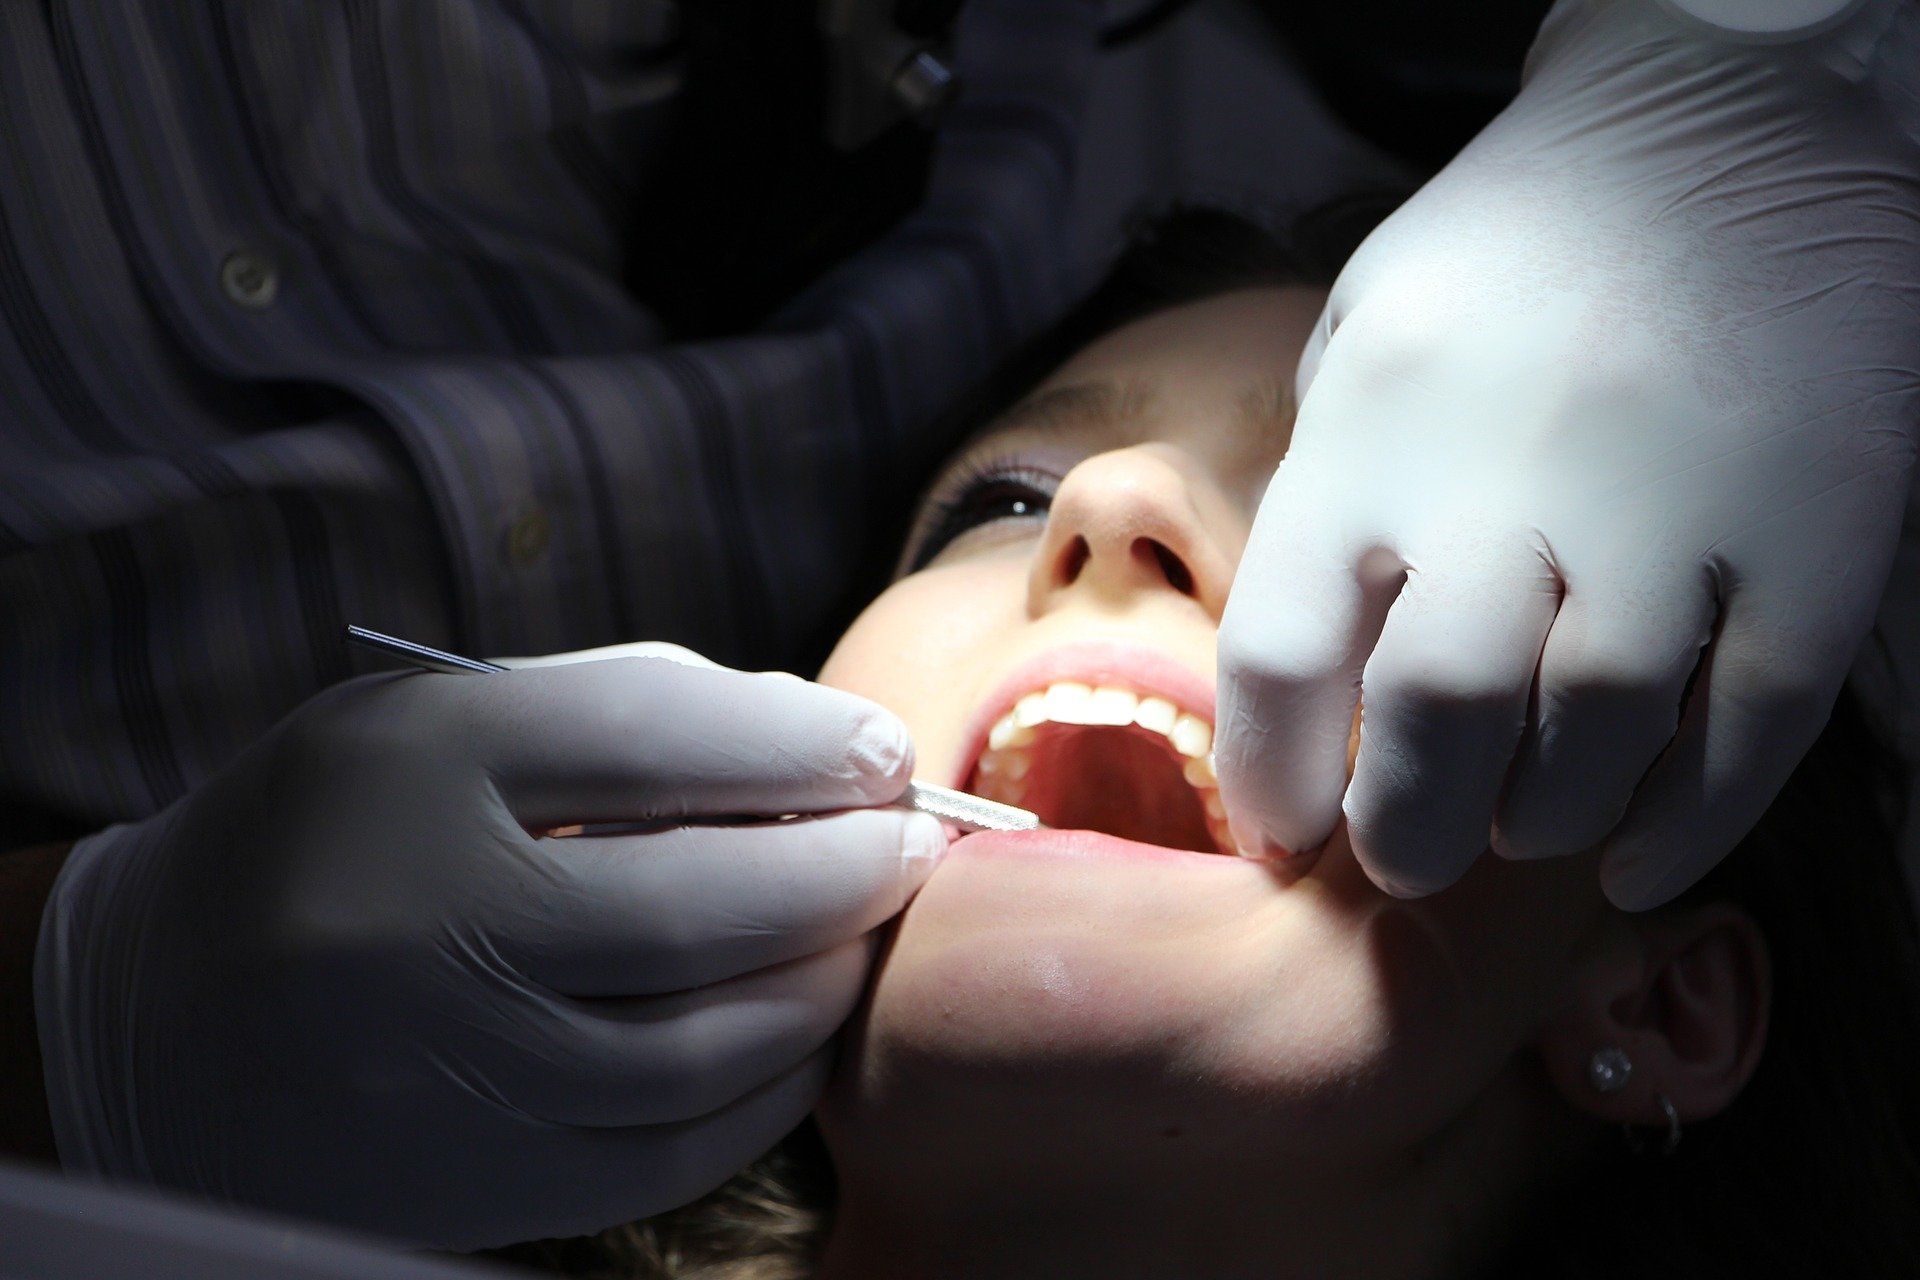 WHO says delay routine dental work due to virus risk